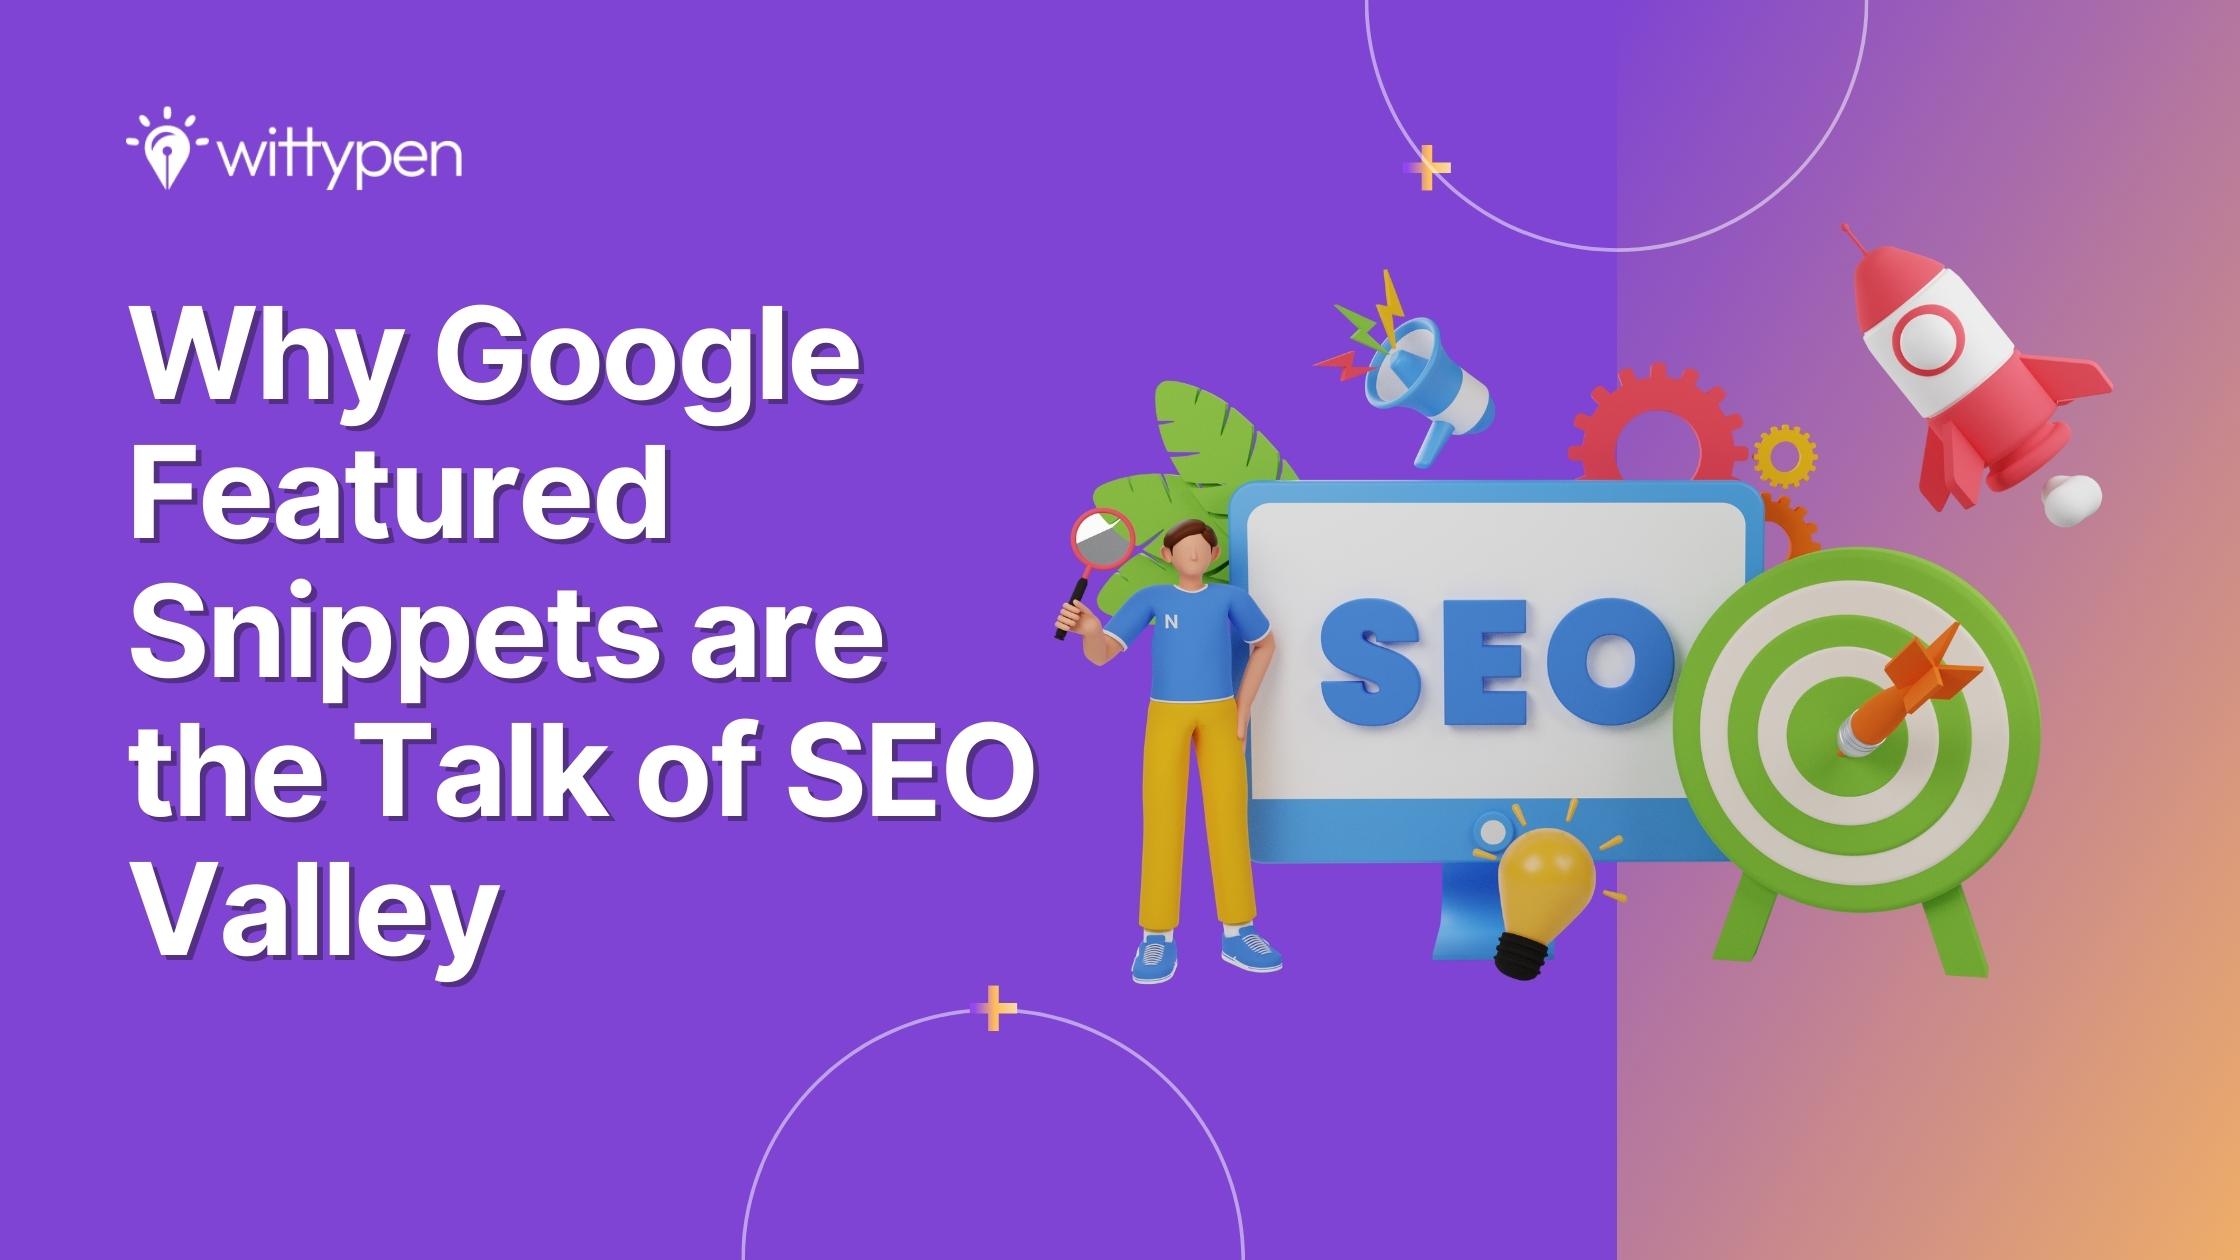 Why Google Featured Snippets are the Talk of SEO Valley